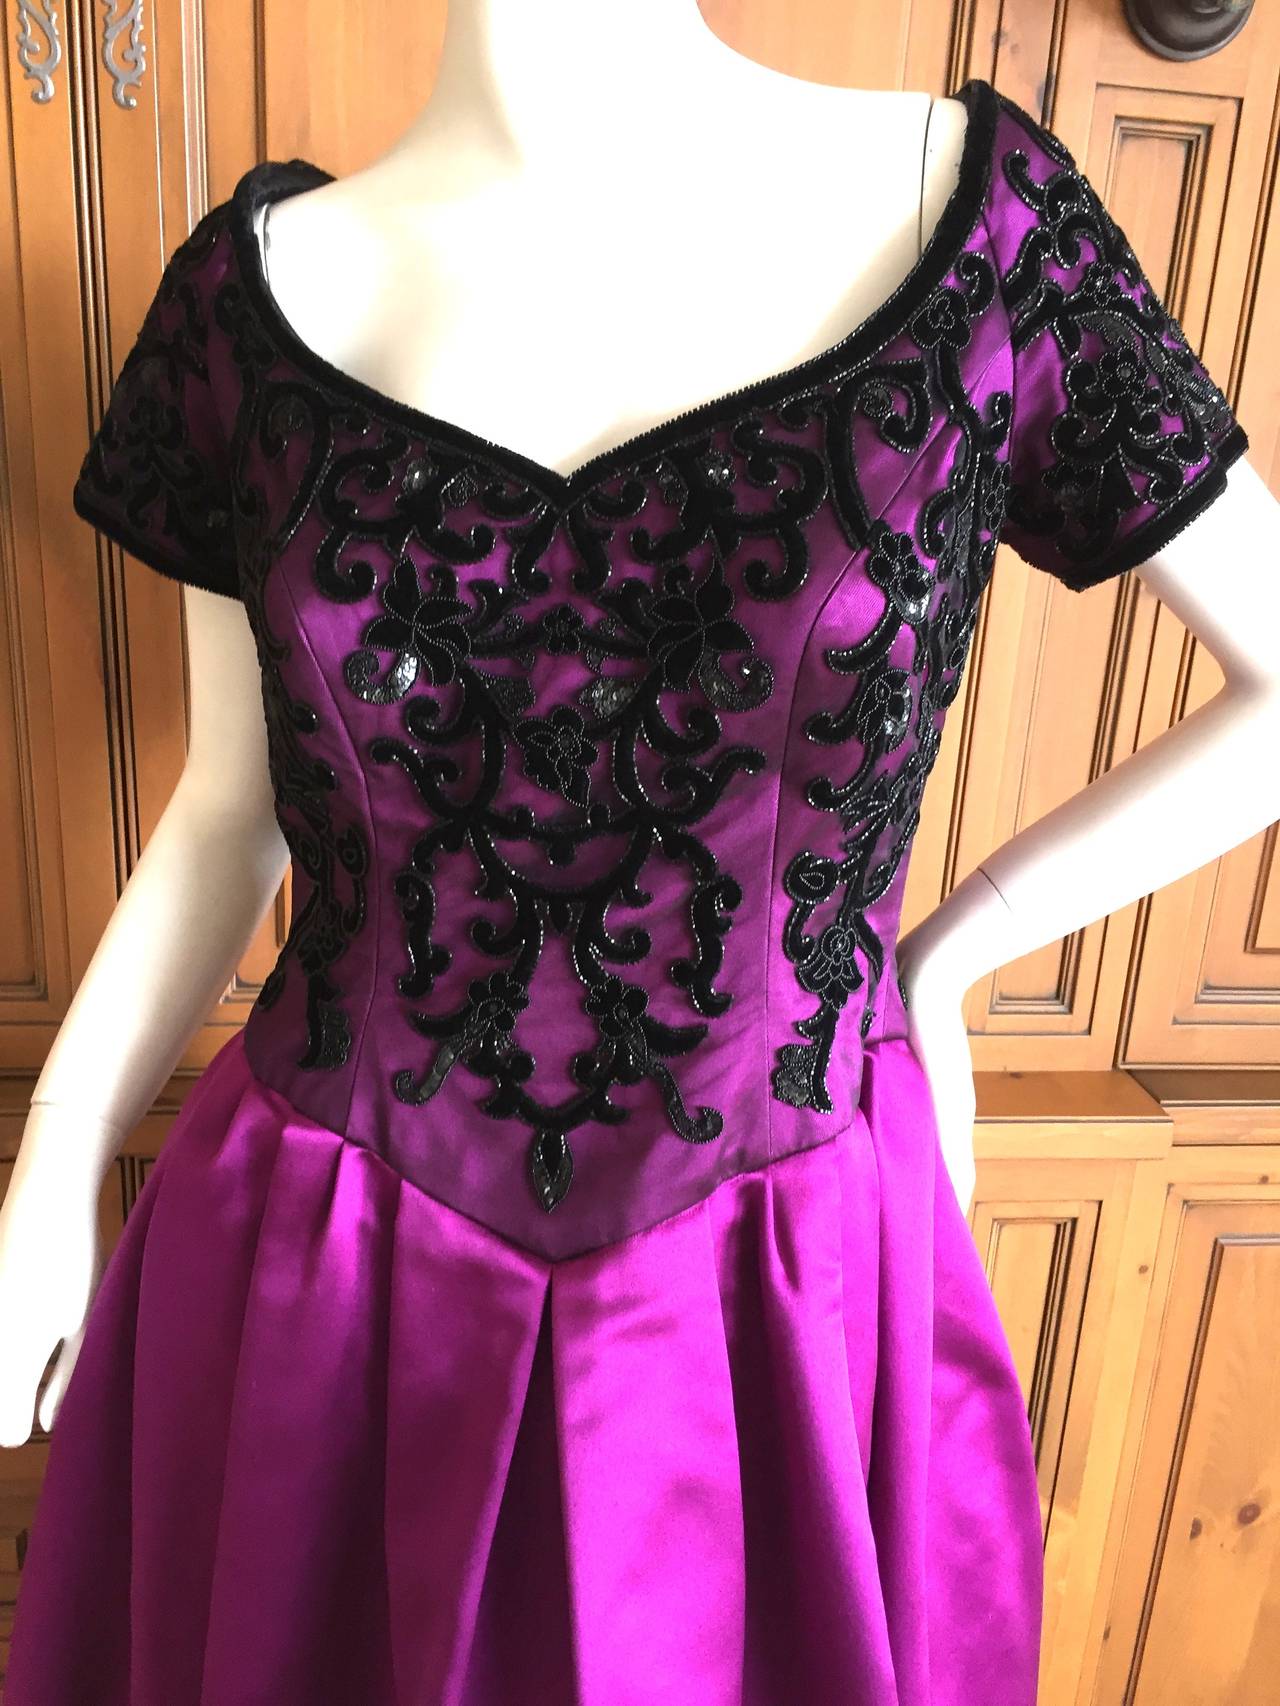 Escada Couture Enchanting Vintage Gown w Sequin Lace Details.
Deep pink silk with black beaded net bodice, very pretty.
Size 44
Bust 39
Waist 32